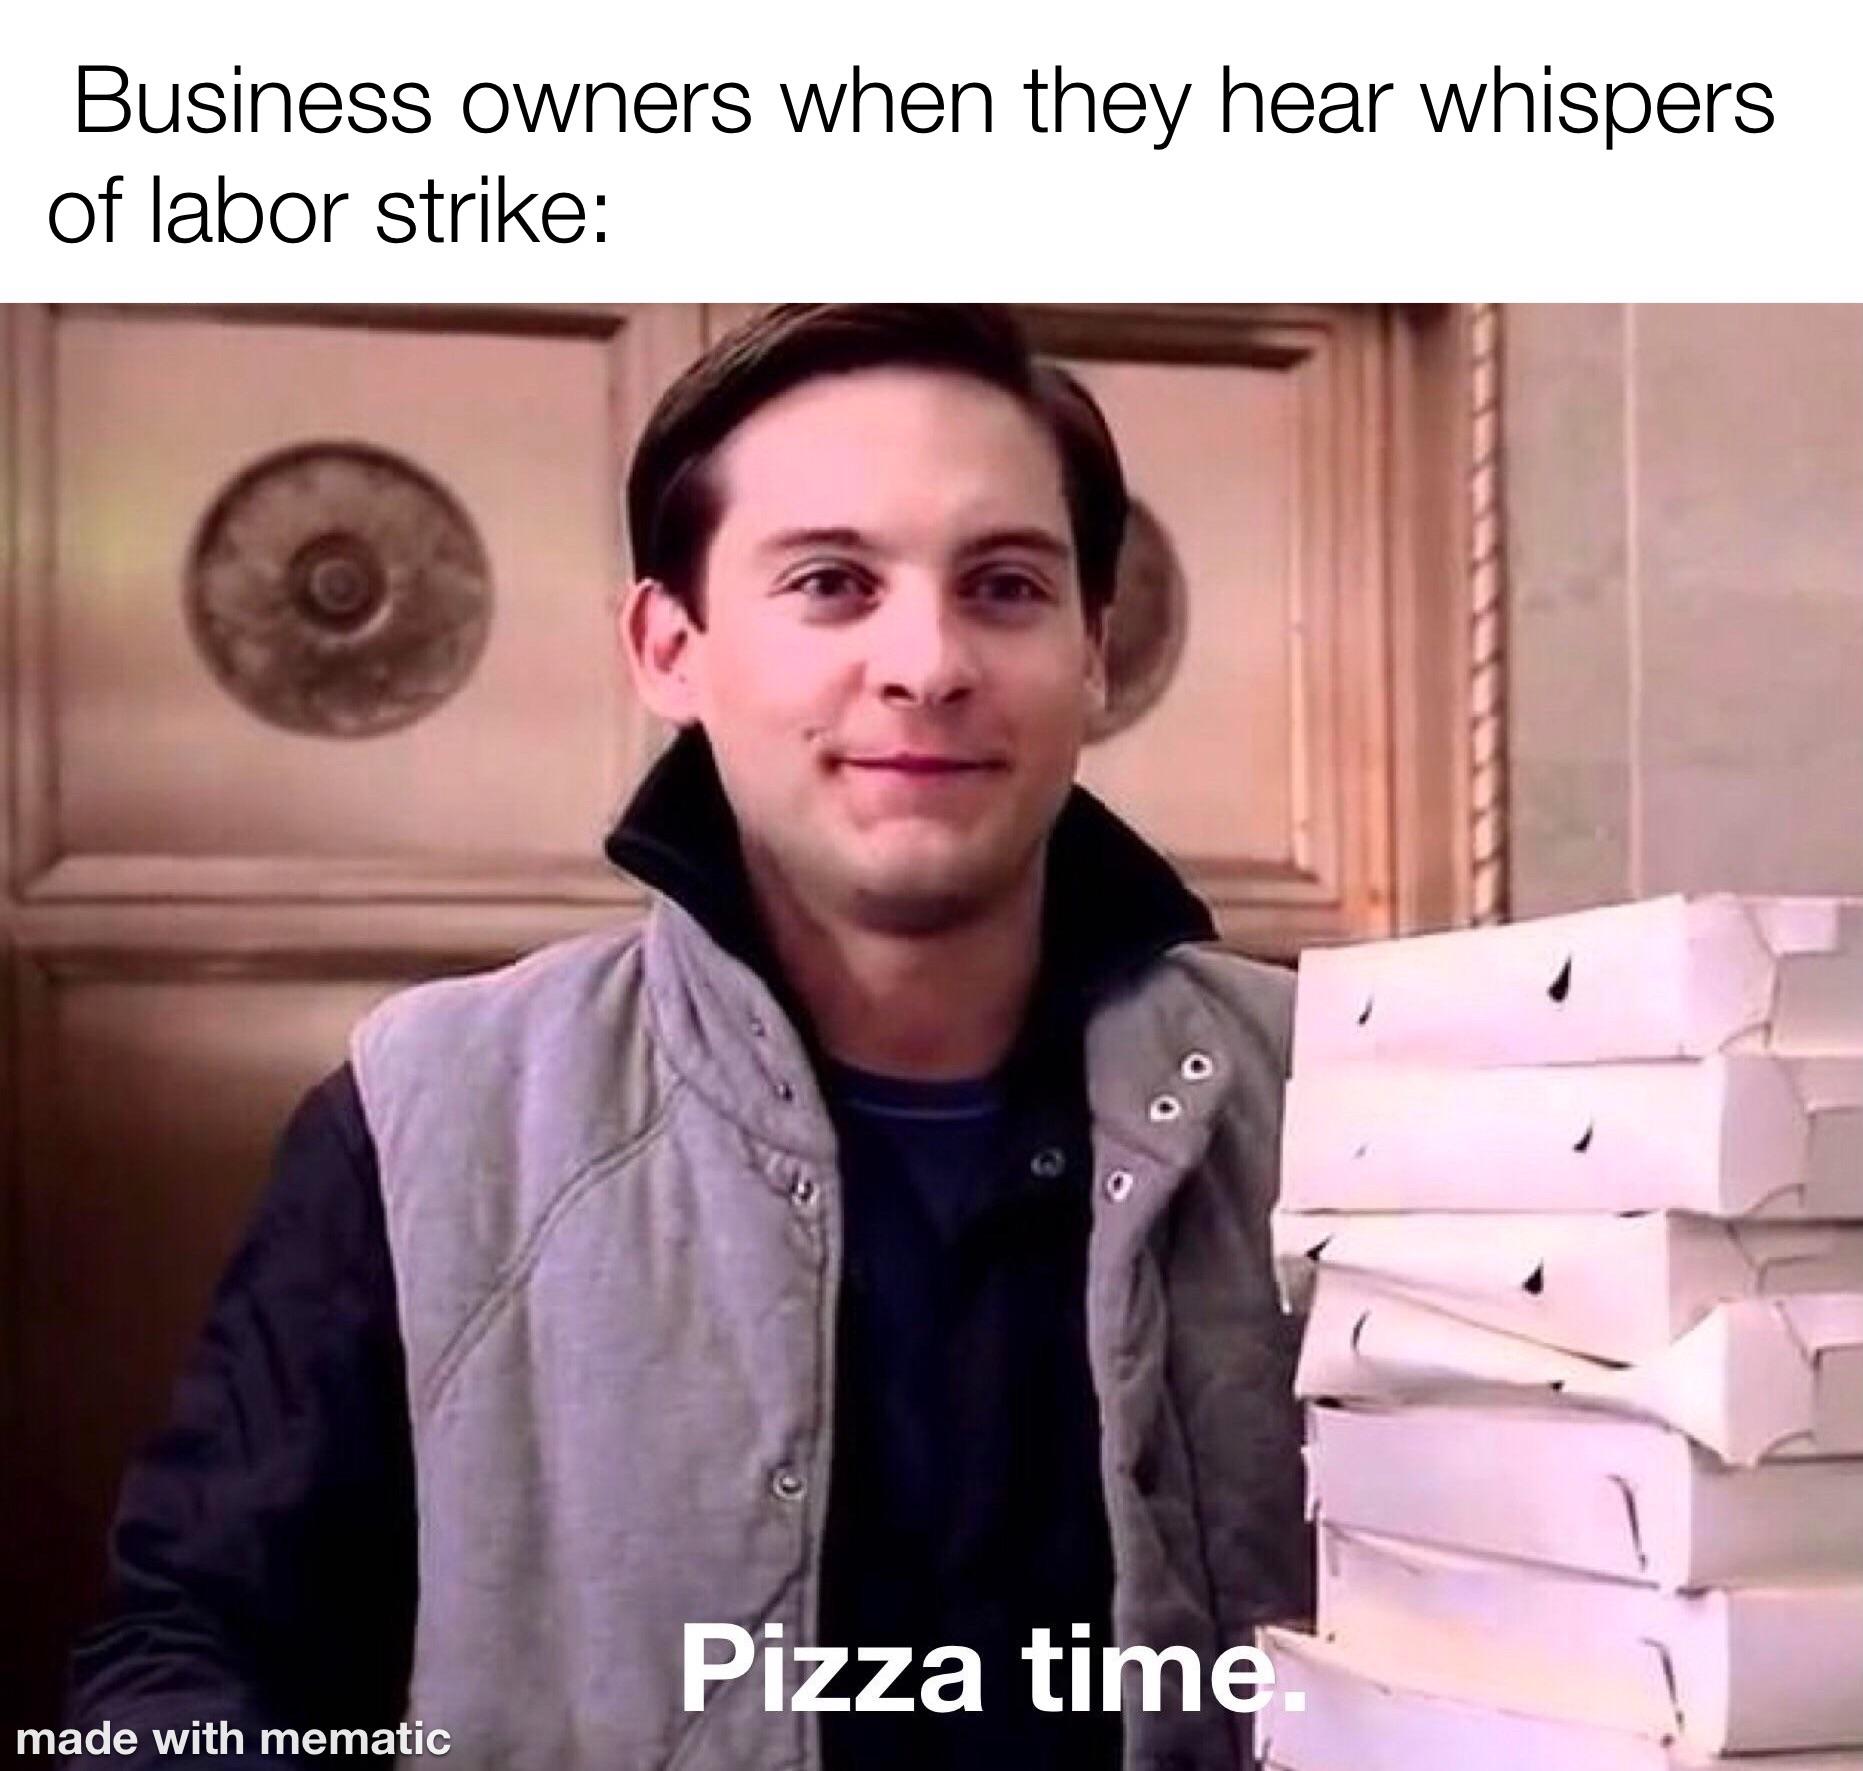 funny memes - pizza time - Business owners when they hear whispers of labor strike Pizza time made with mematic